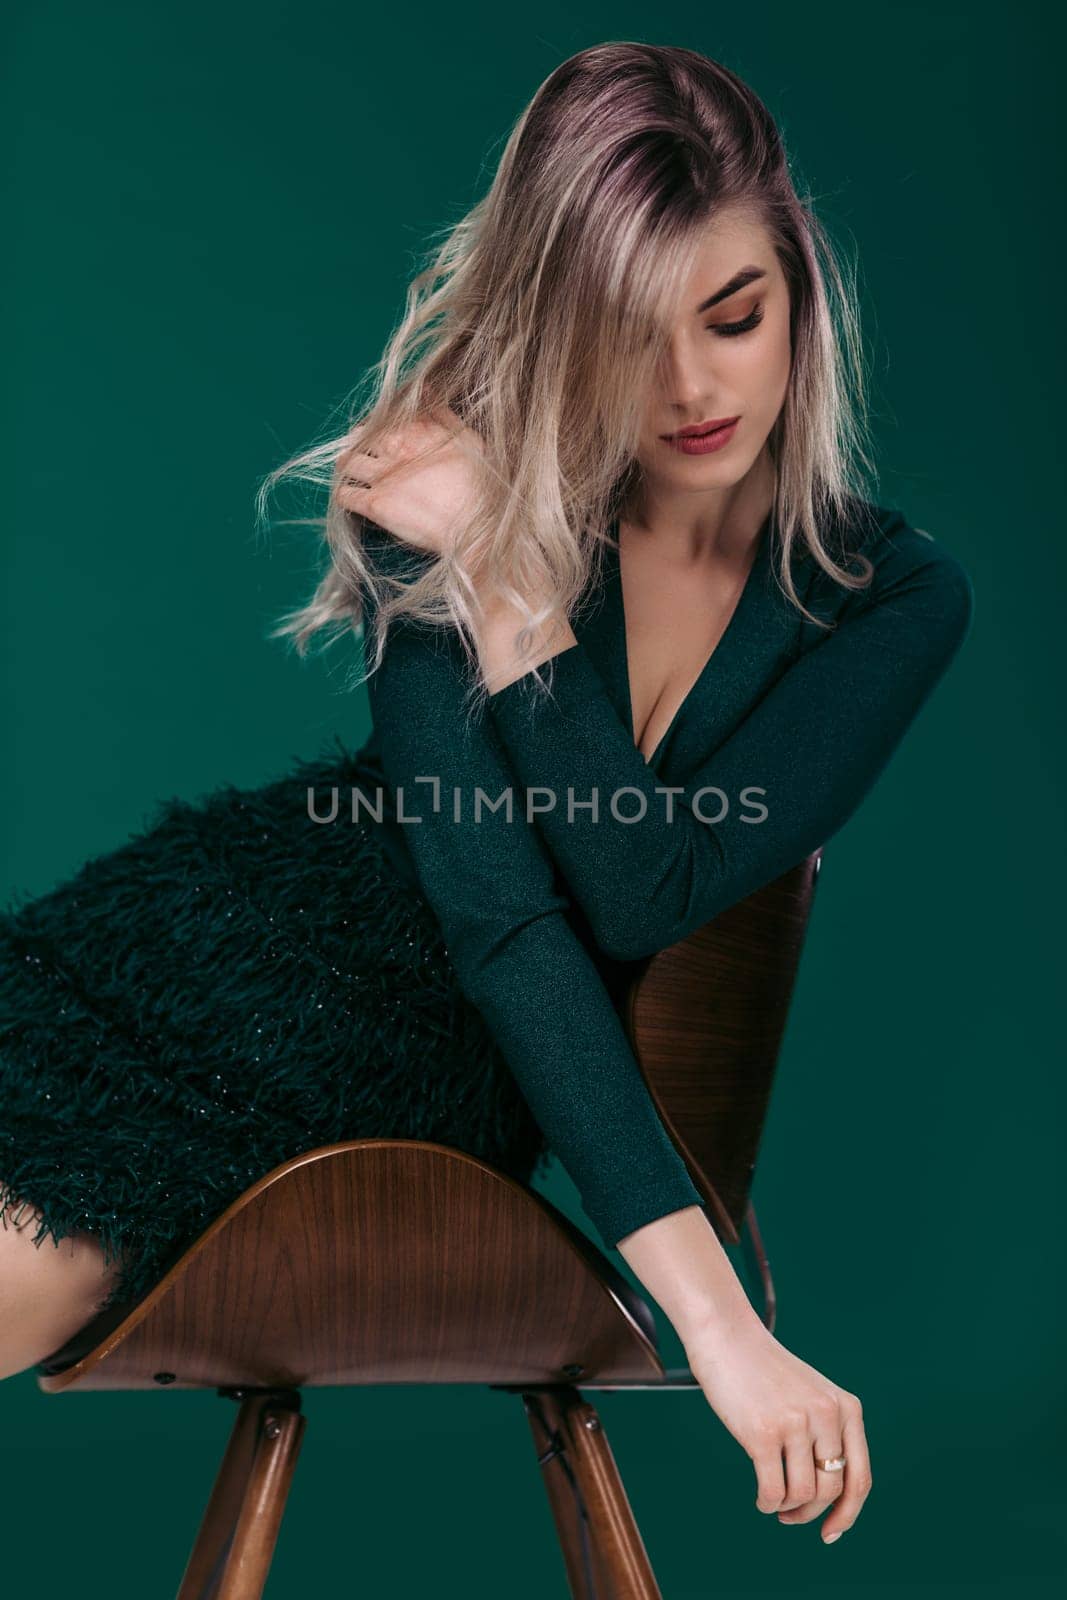 fashion portrait of sexy sensual beautiful blonde woman in green dress sitting on chair against green background